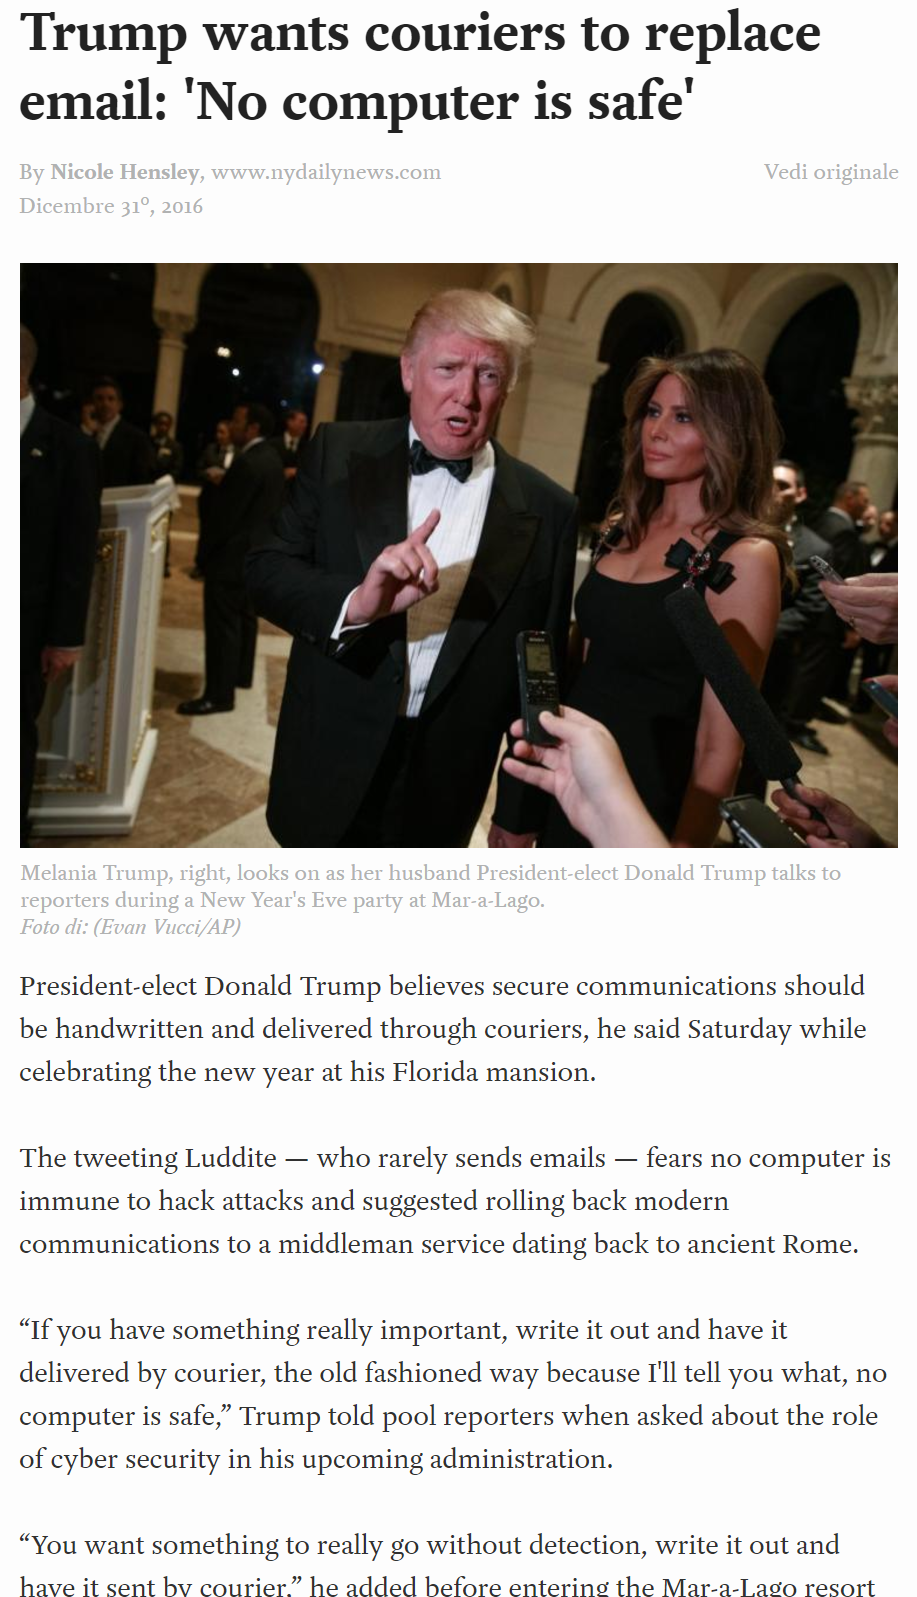 conversation - Trump wants couriers to replace email 'No computer is safe' Vrld Presidentelect Donald Trump believes secure communications should be handwritten and delivered through couriers, he said Saturday while celebrating the new year at his Florida